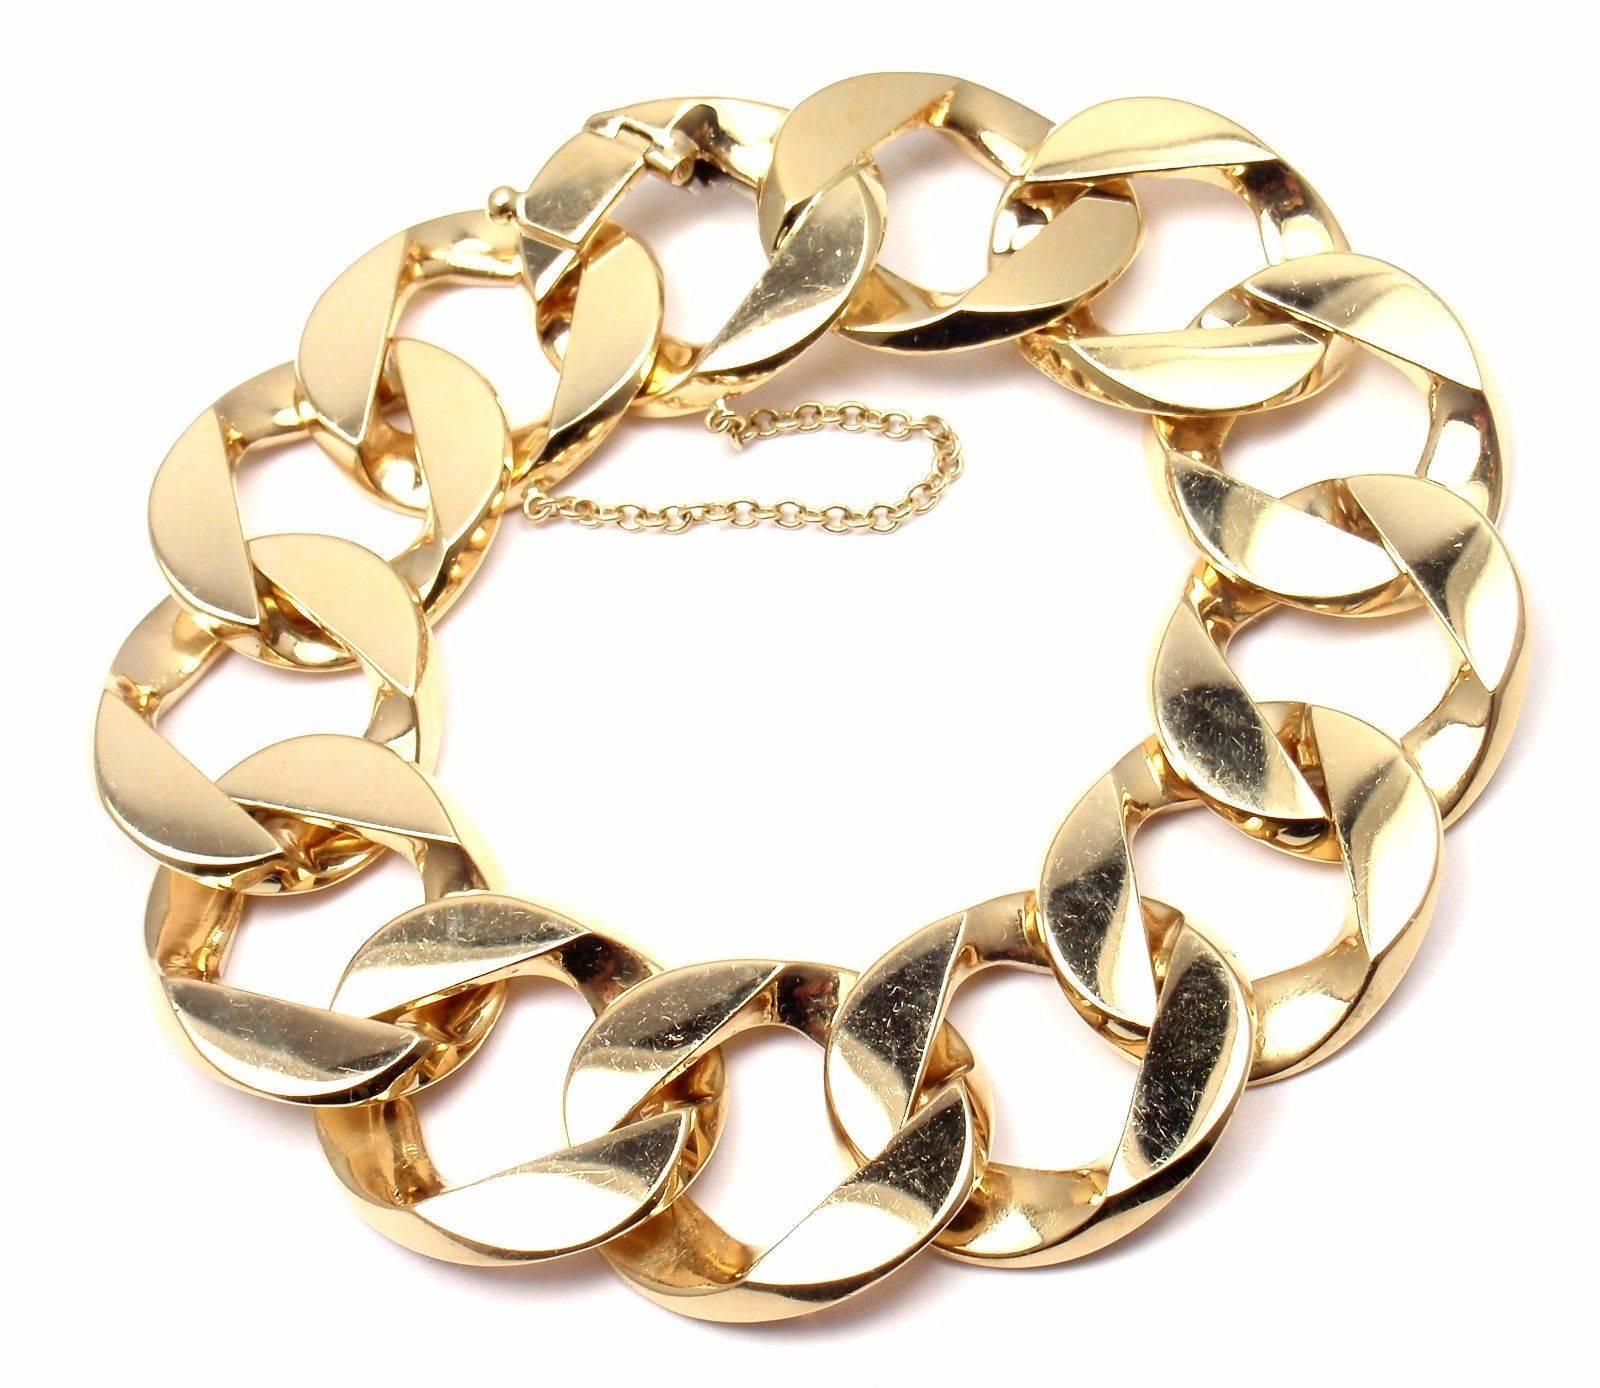 When Verdura designed the Curb-Link bracelet for Greta Garbo in the late 1930's he created a 